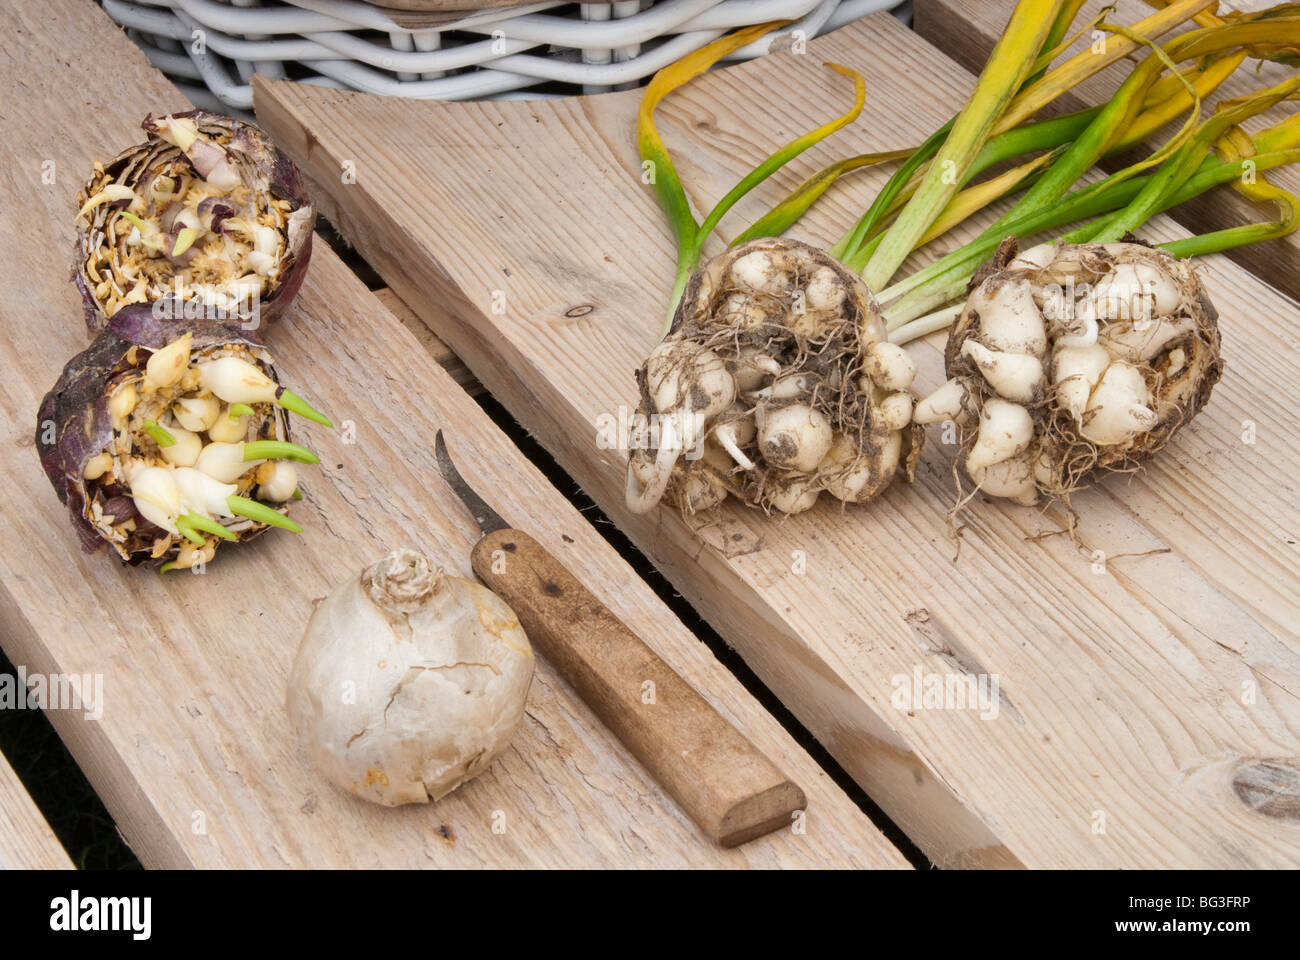 Dividing a hyacinth bulb, with knife and showing interior with new bulbets Stock Photo